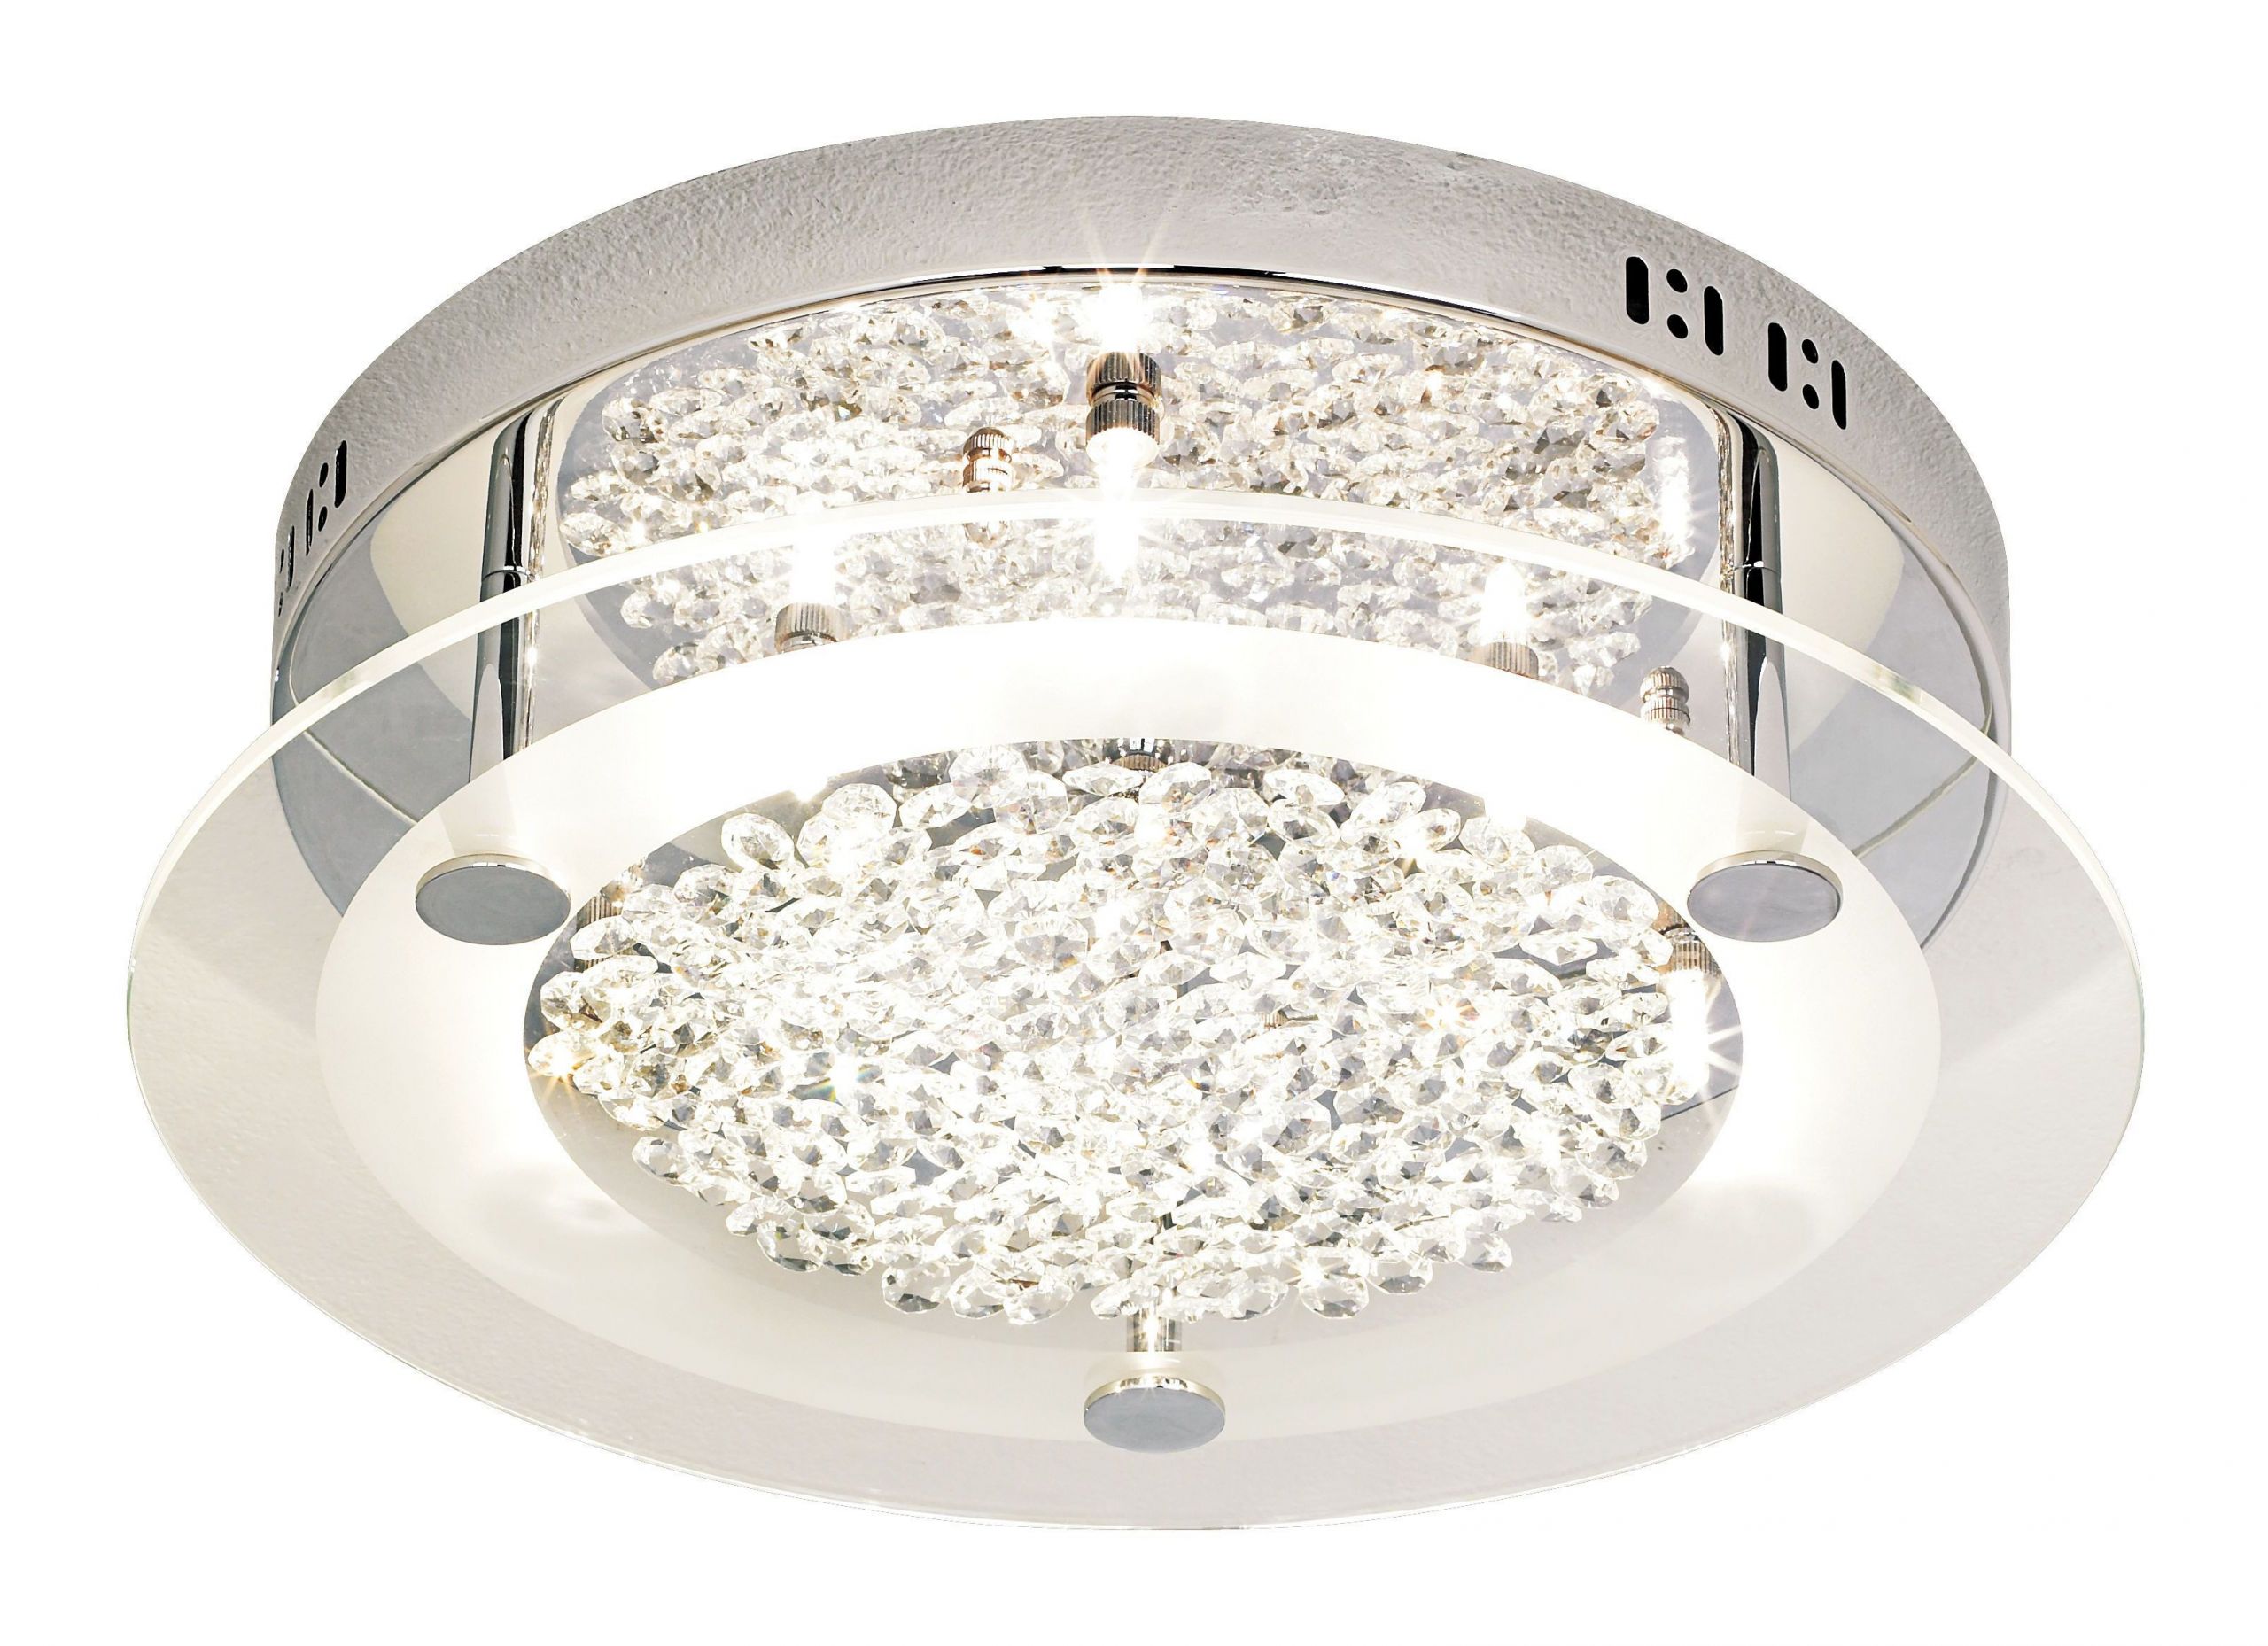 20 Luxury Bathroom Exhaust Fan Light Combo Home, Family, Style and Art Ideas